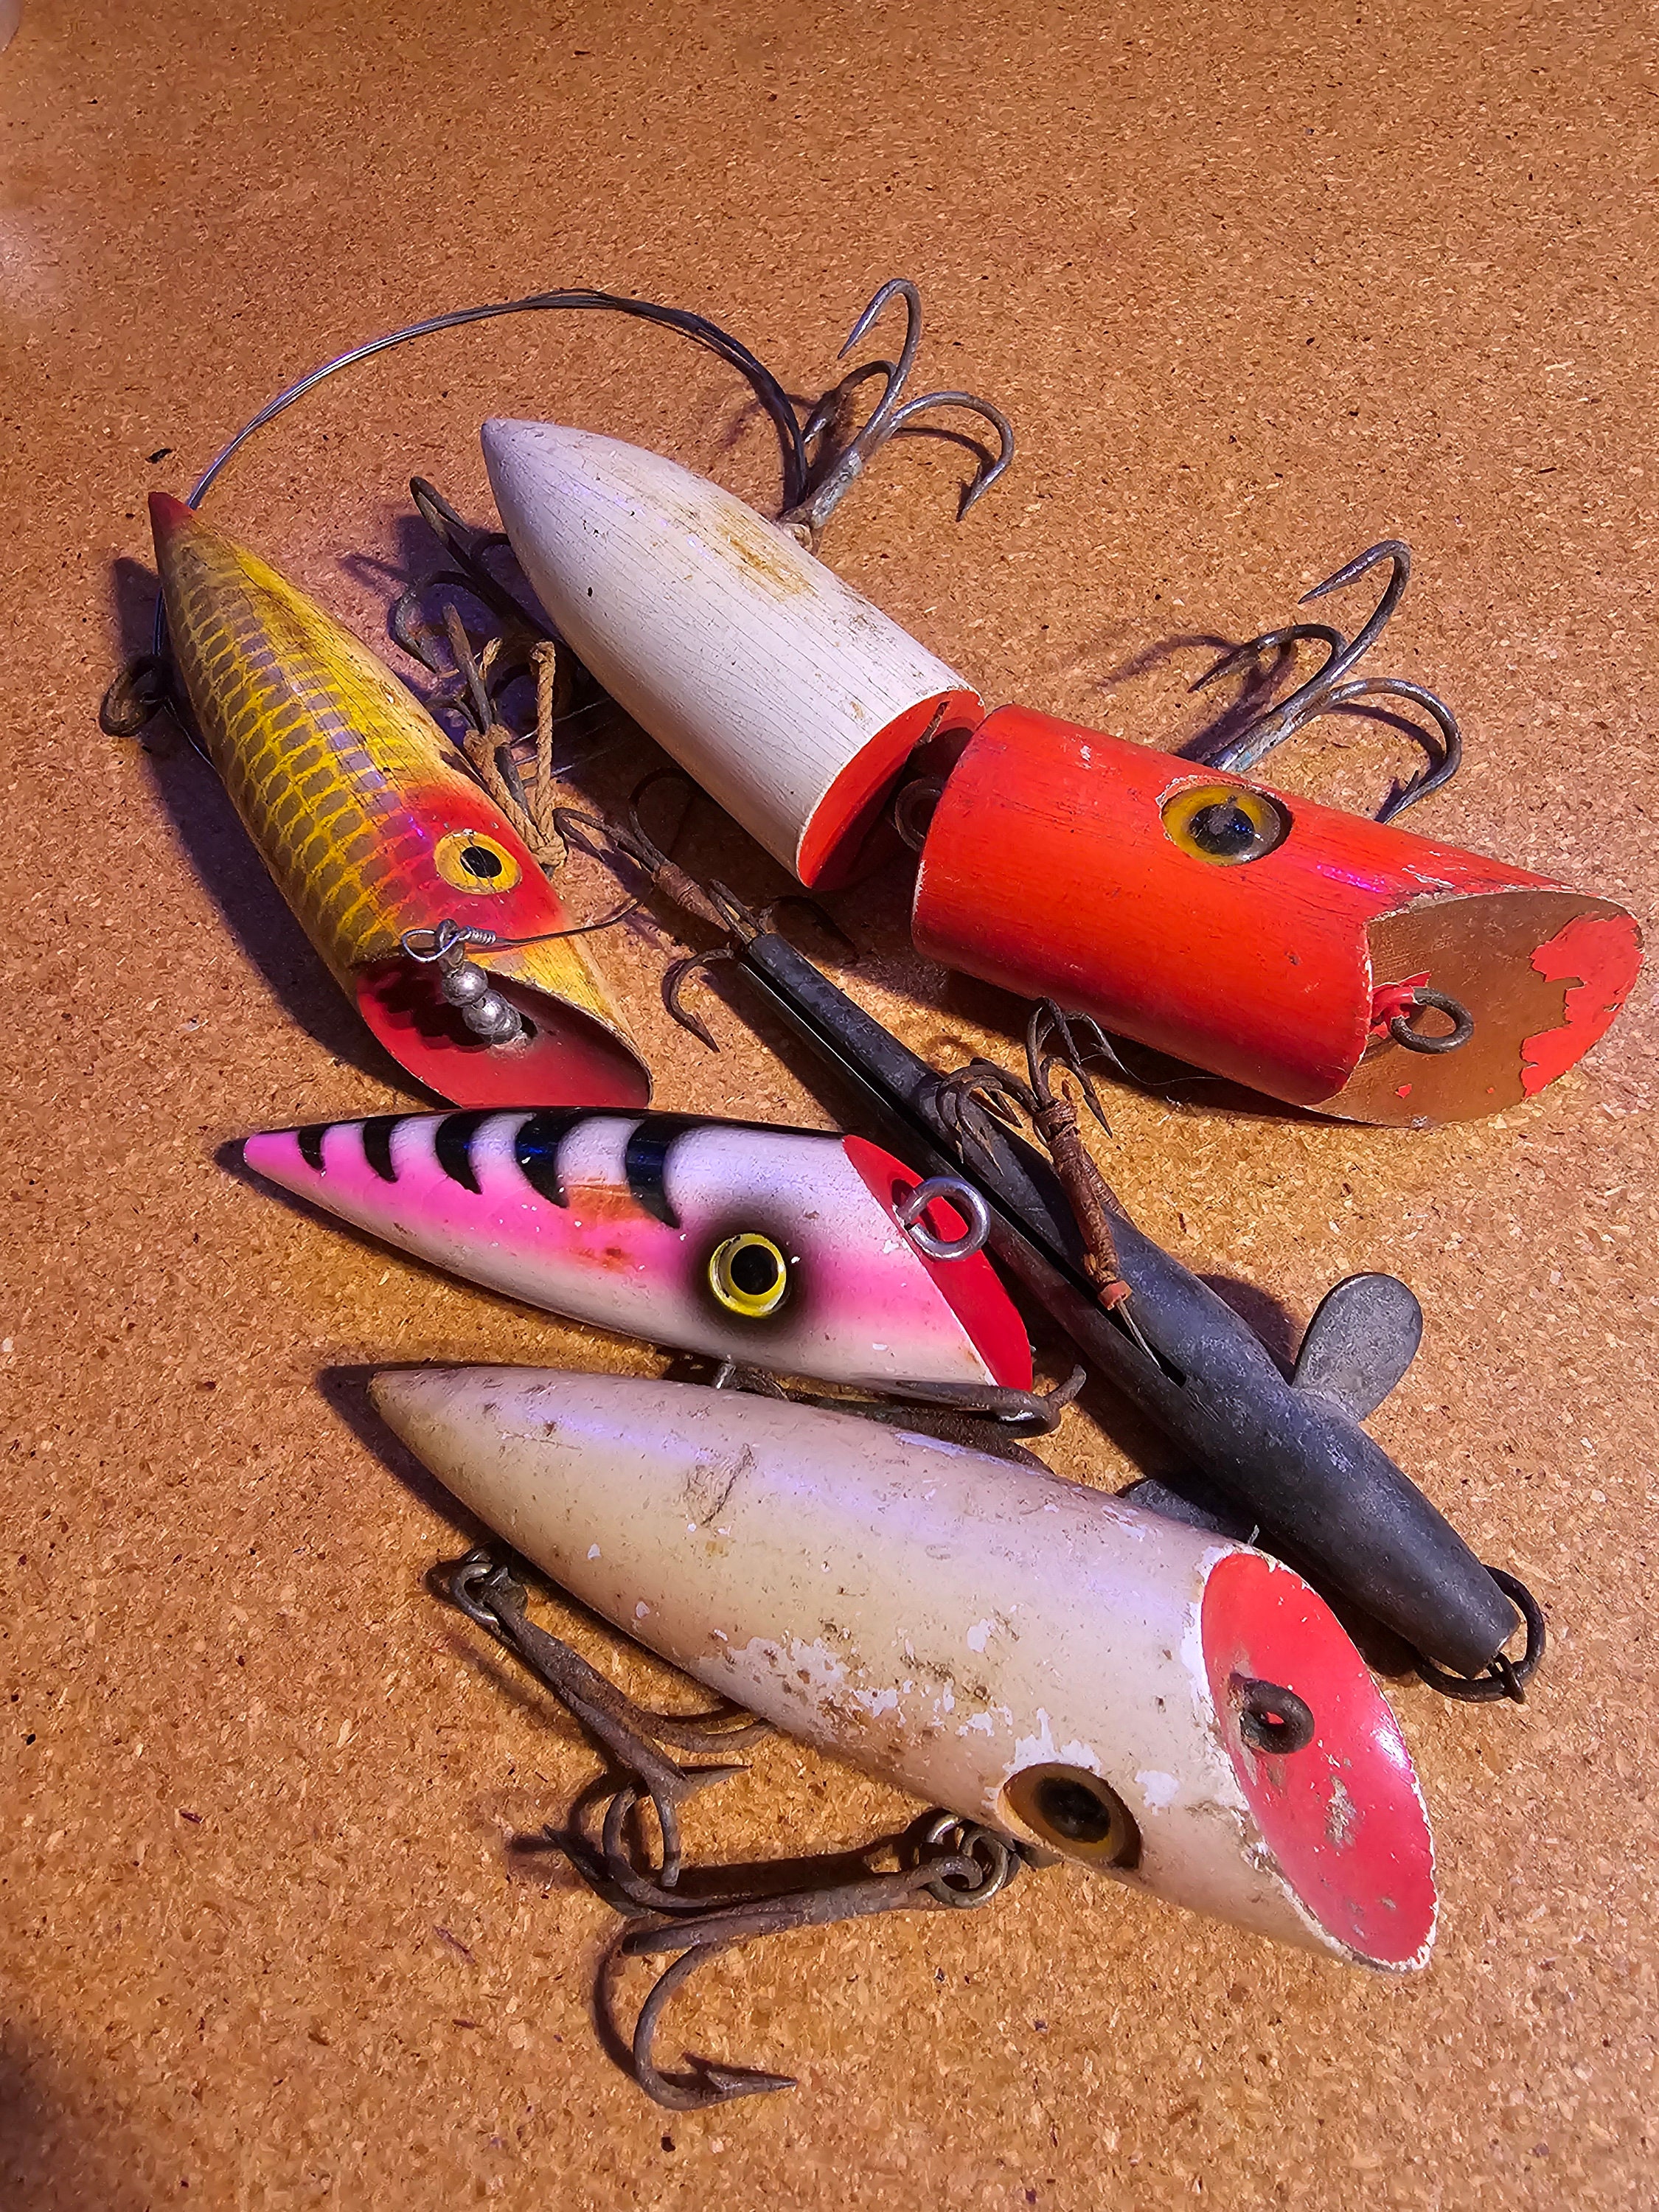 Vintage Old Pike Spinner Baits 4 Pc Lot Vg Or Better Fishable Fishing Lures